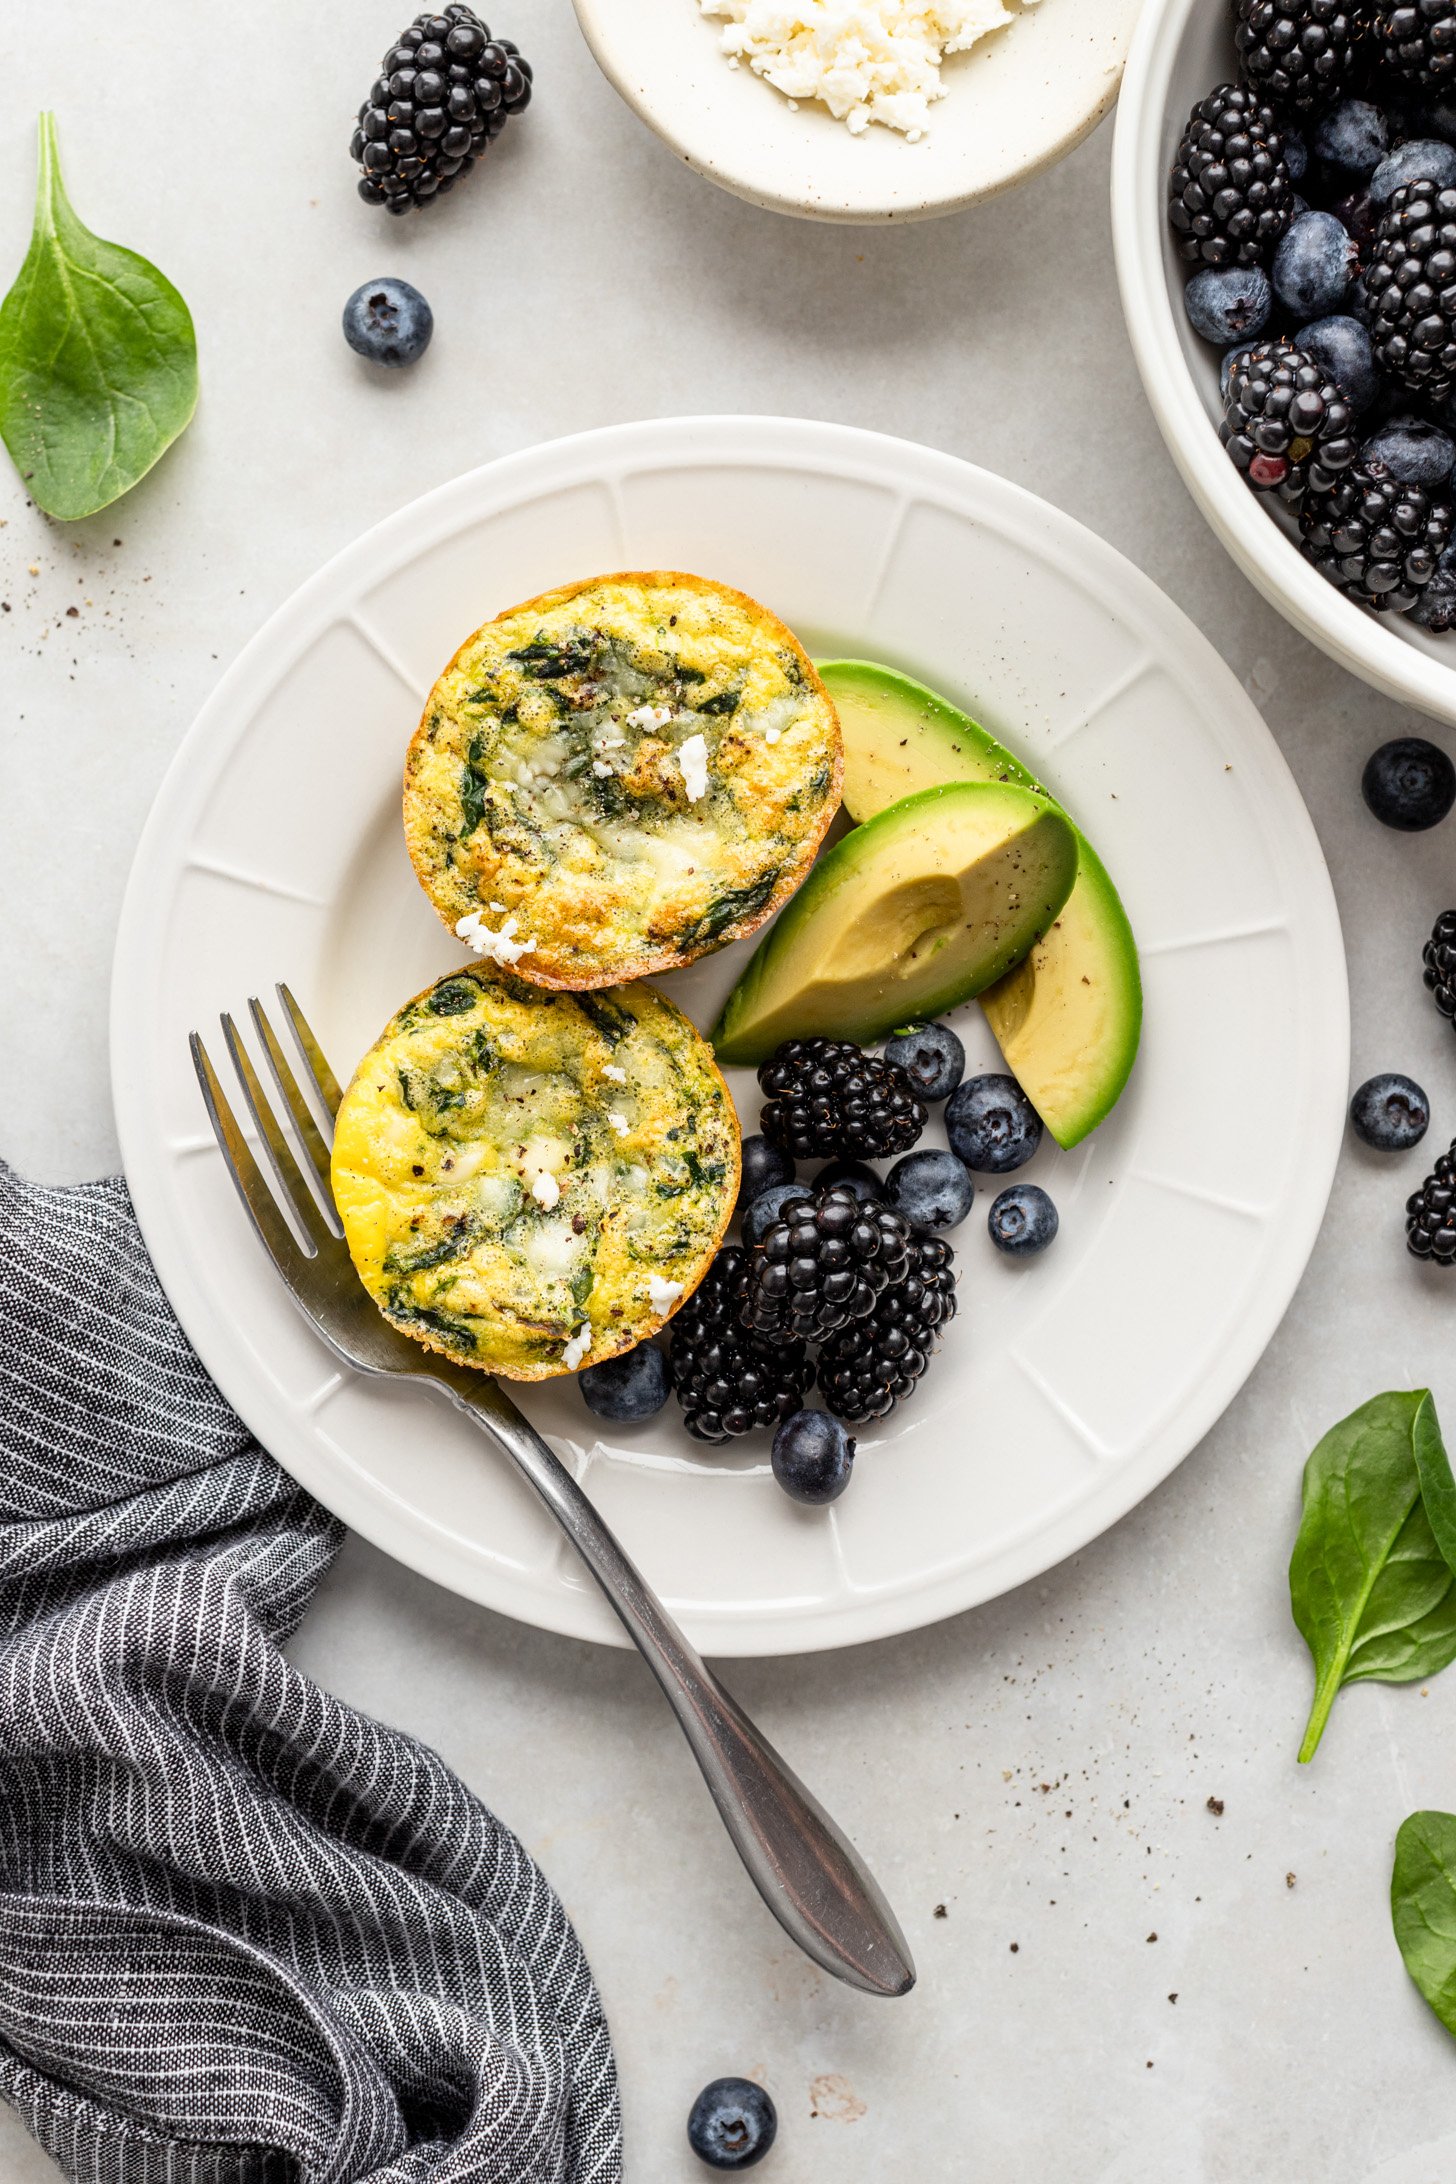 Two spinach feta egg cups on a white plate with avocado and berries. there is a fork on the plate and there is a napkin, spinach leaves, and berries next to it in a bowl